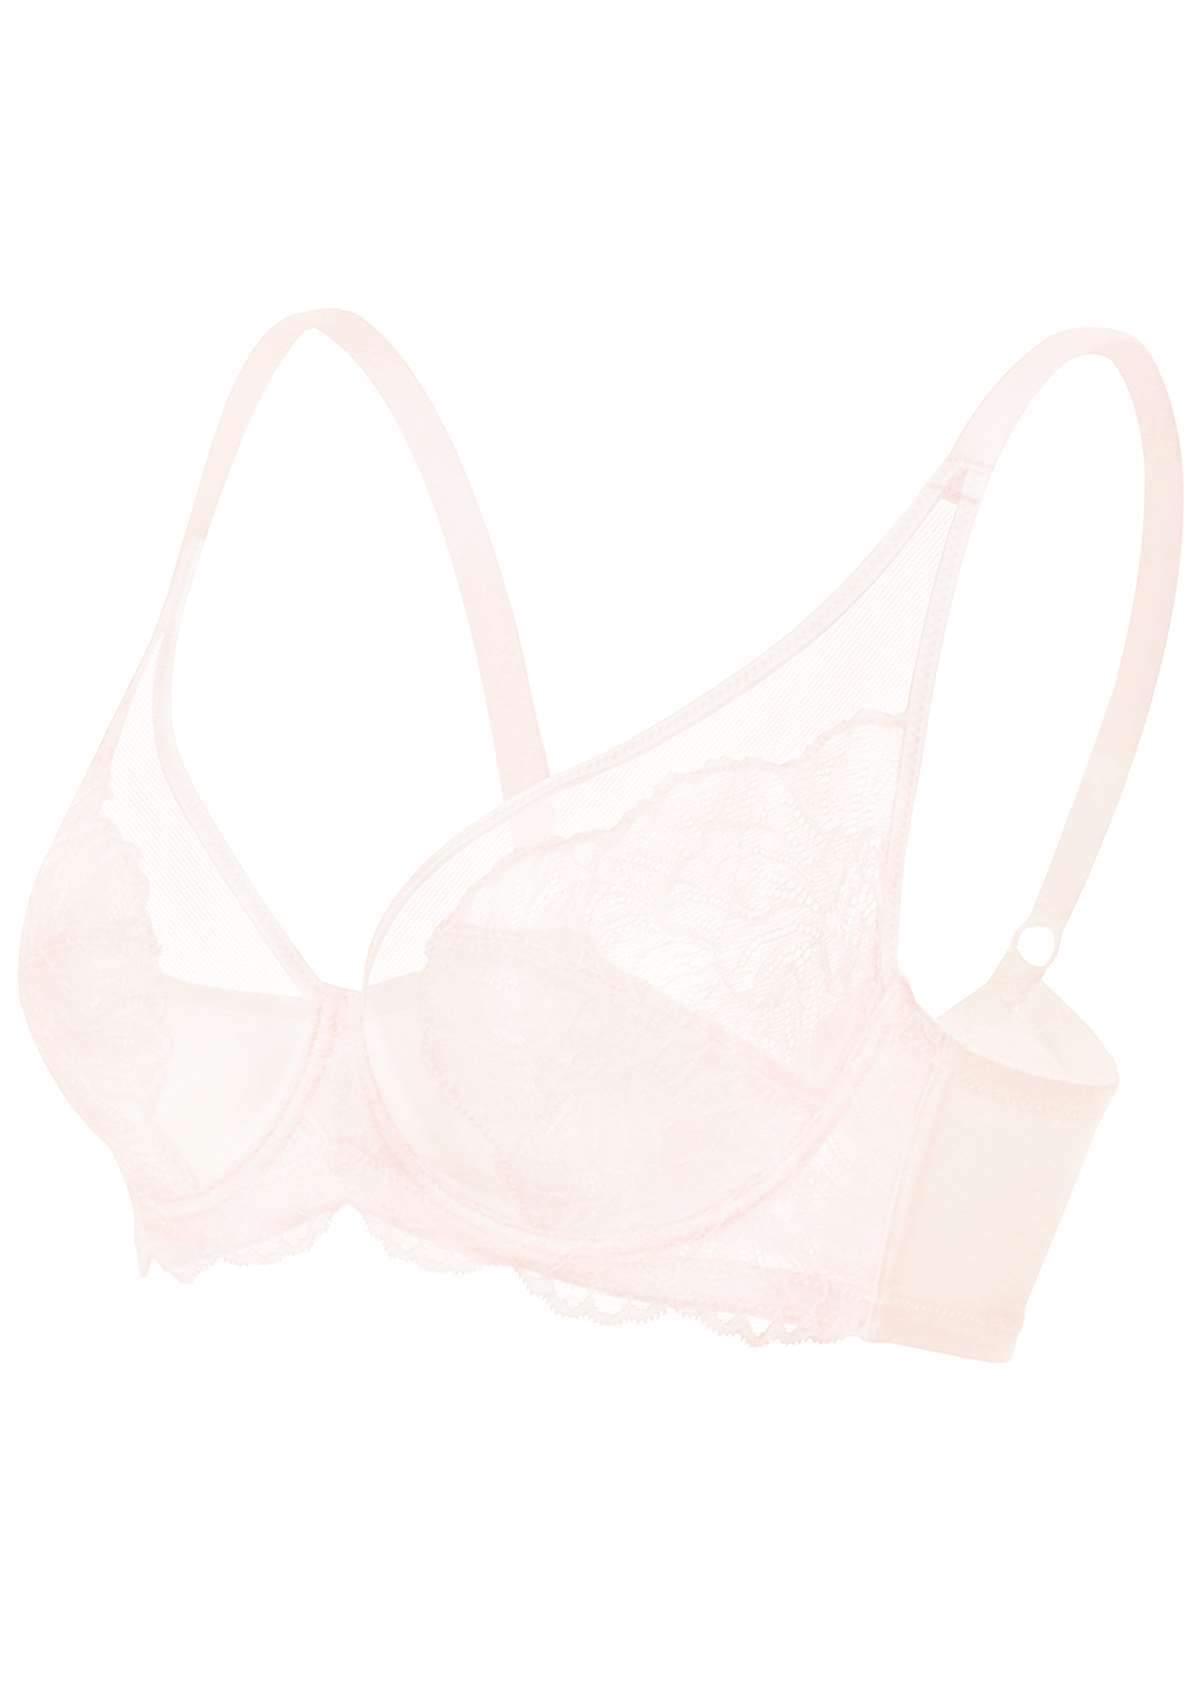 HSIA Blossom Sheer Lace Bra: Comfortable Underwire Bra For Big Busts - Dusty Peach / 44 / D